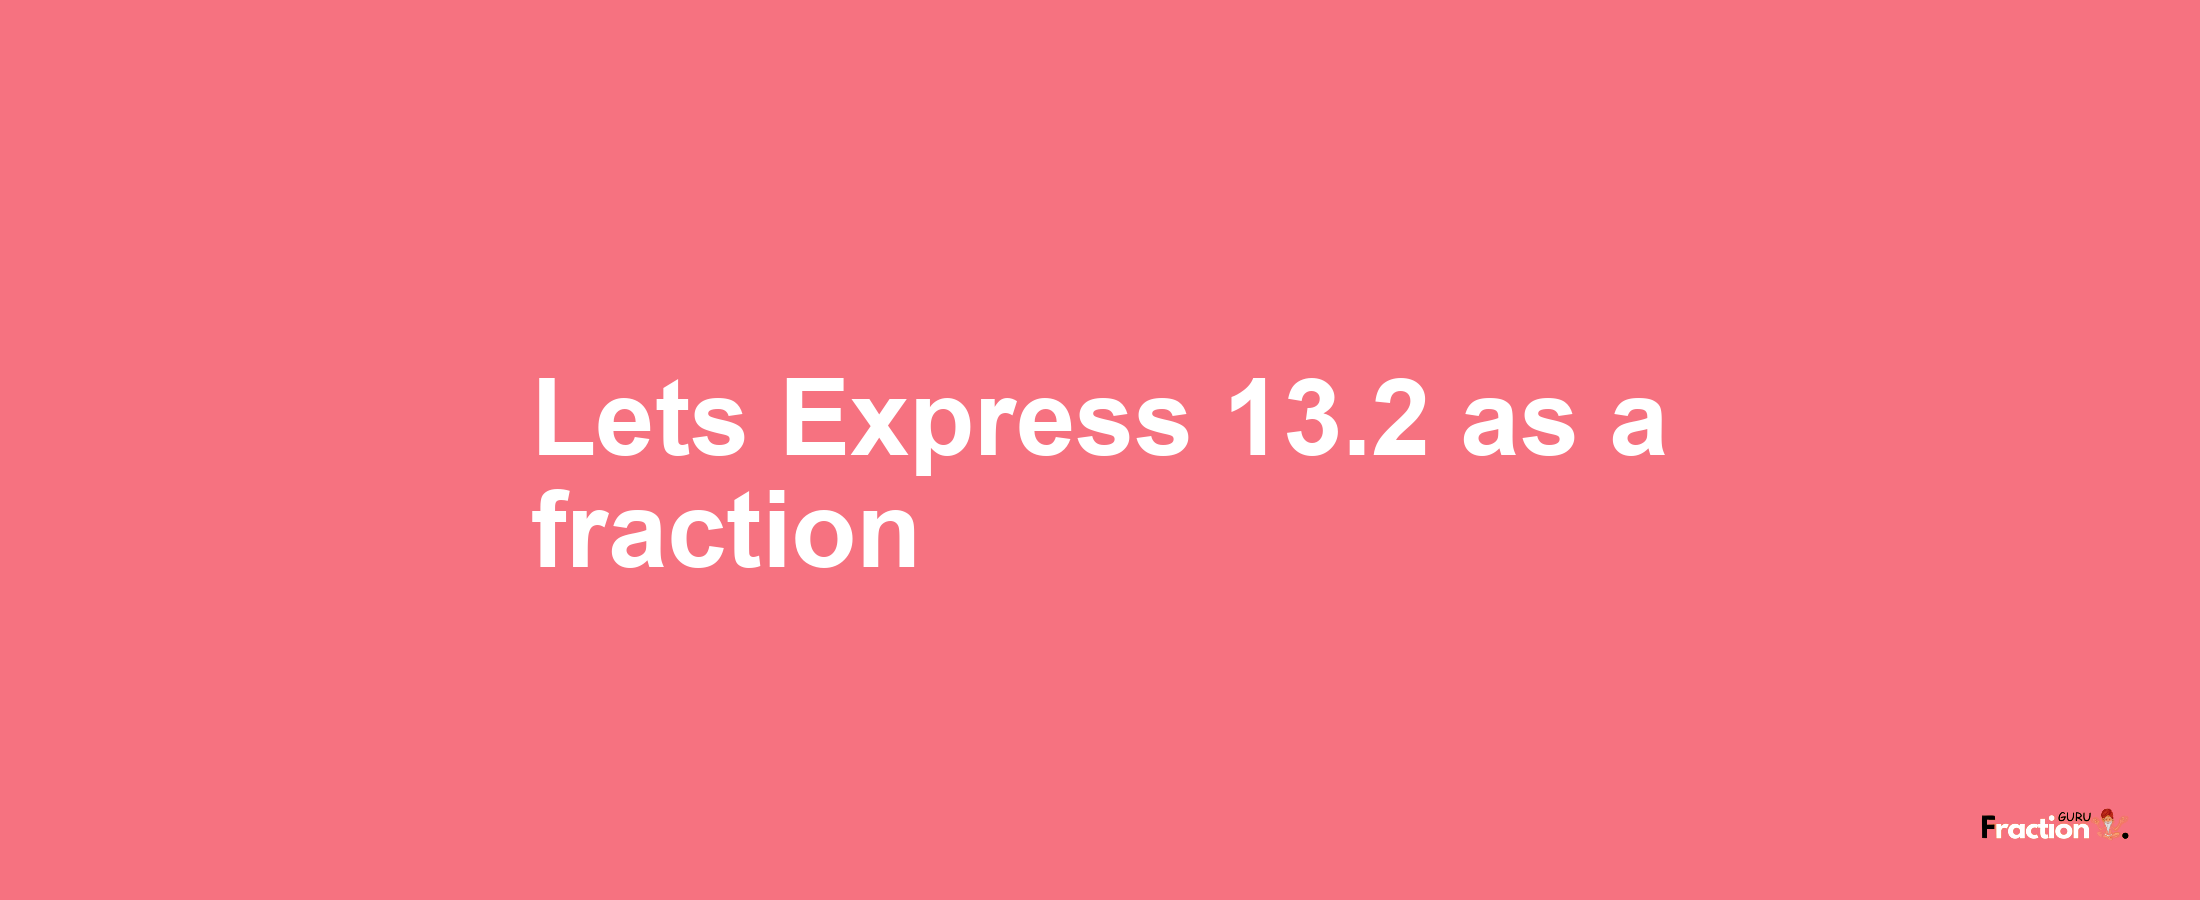 Lets Express 13.2 as afraction